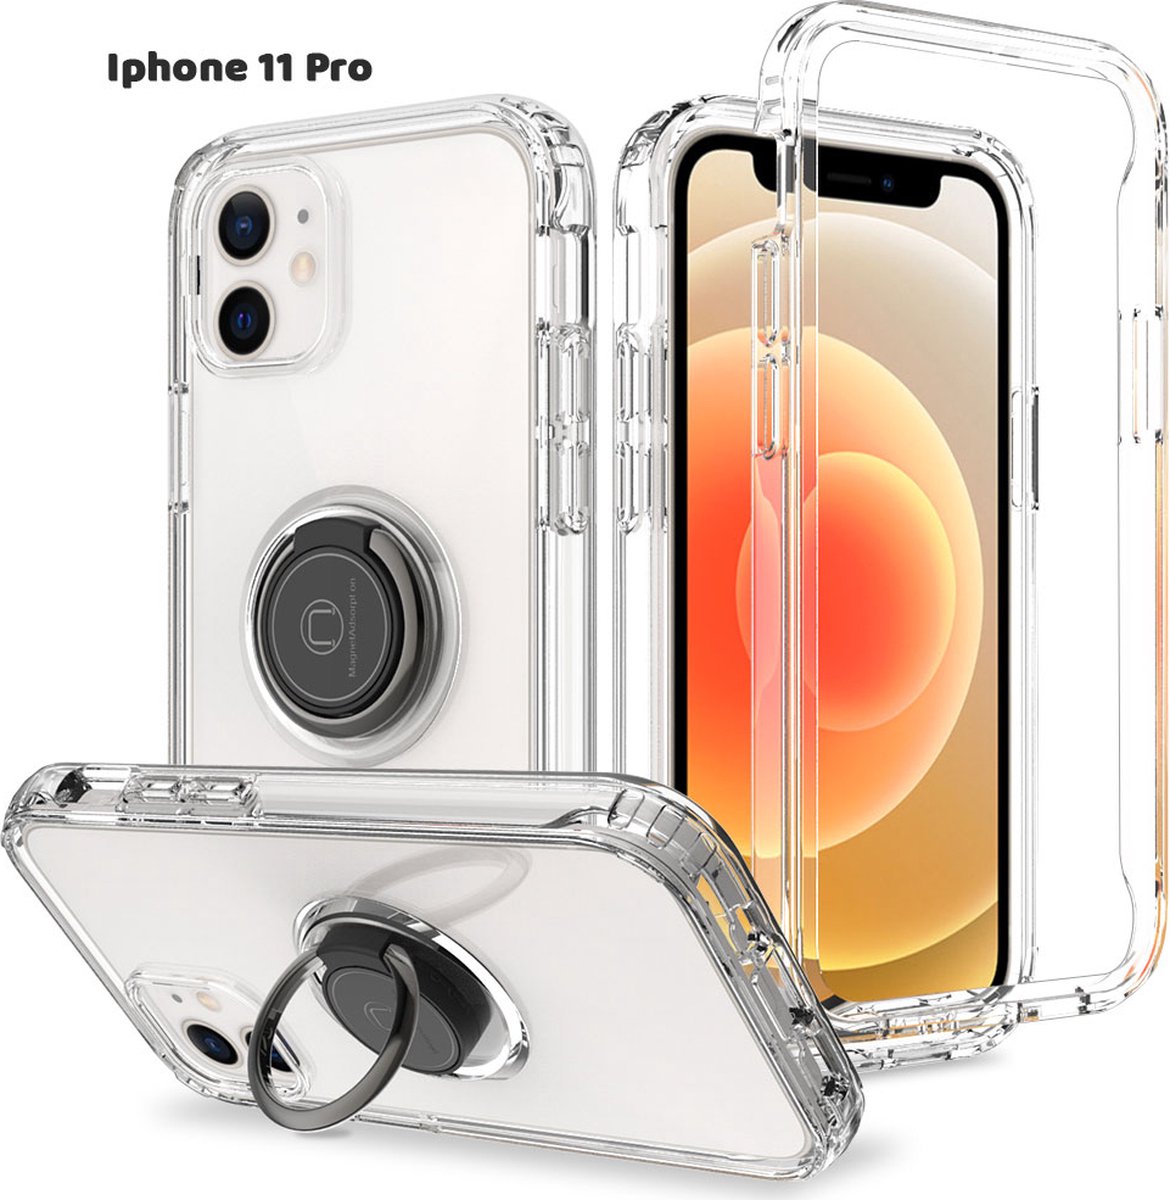 Space Ring Transparant iPhone 11 Pro hoesje, Gratis 2 iPhone 11 Pro Screenprotector, hoesje iPhone 11 Pro, iphone 11 Pro bumper hoesje, iphone 11 Pro bumper case, iphone 11 Pro Backcover hoesje